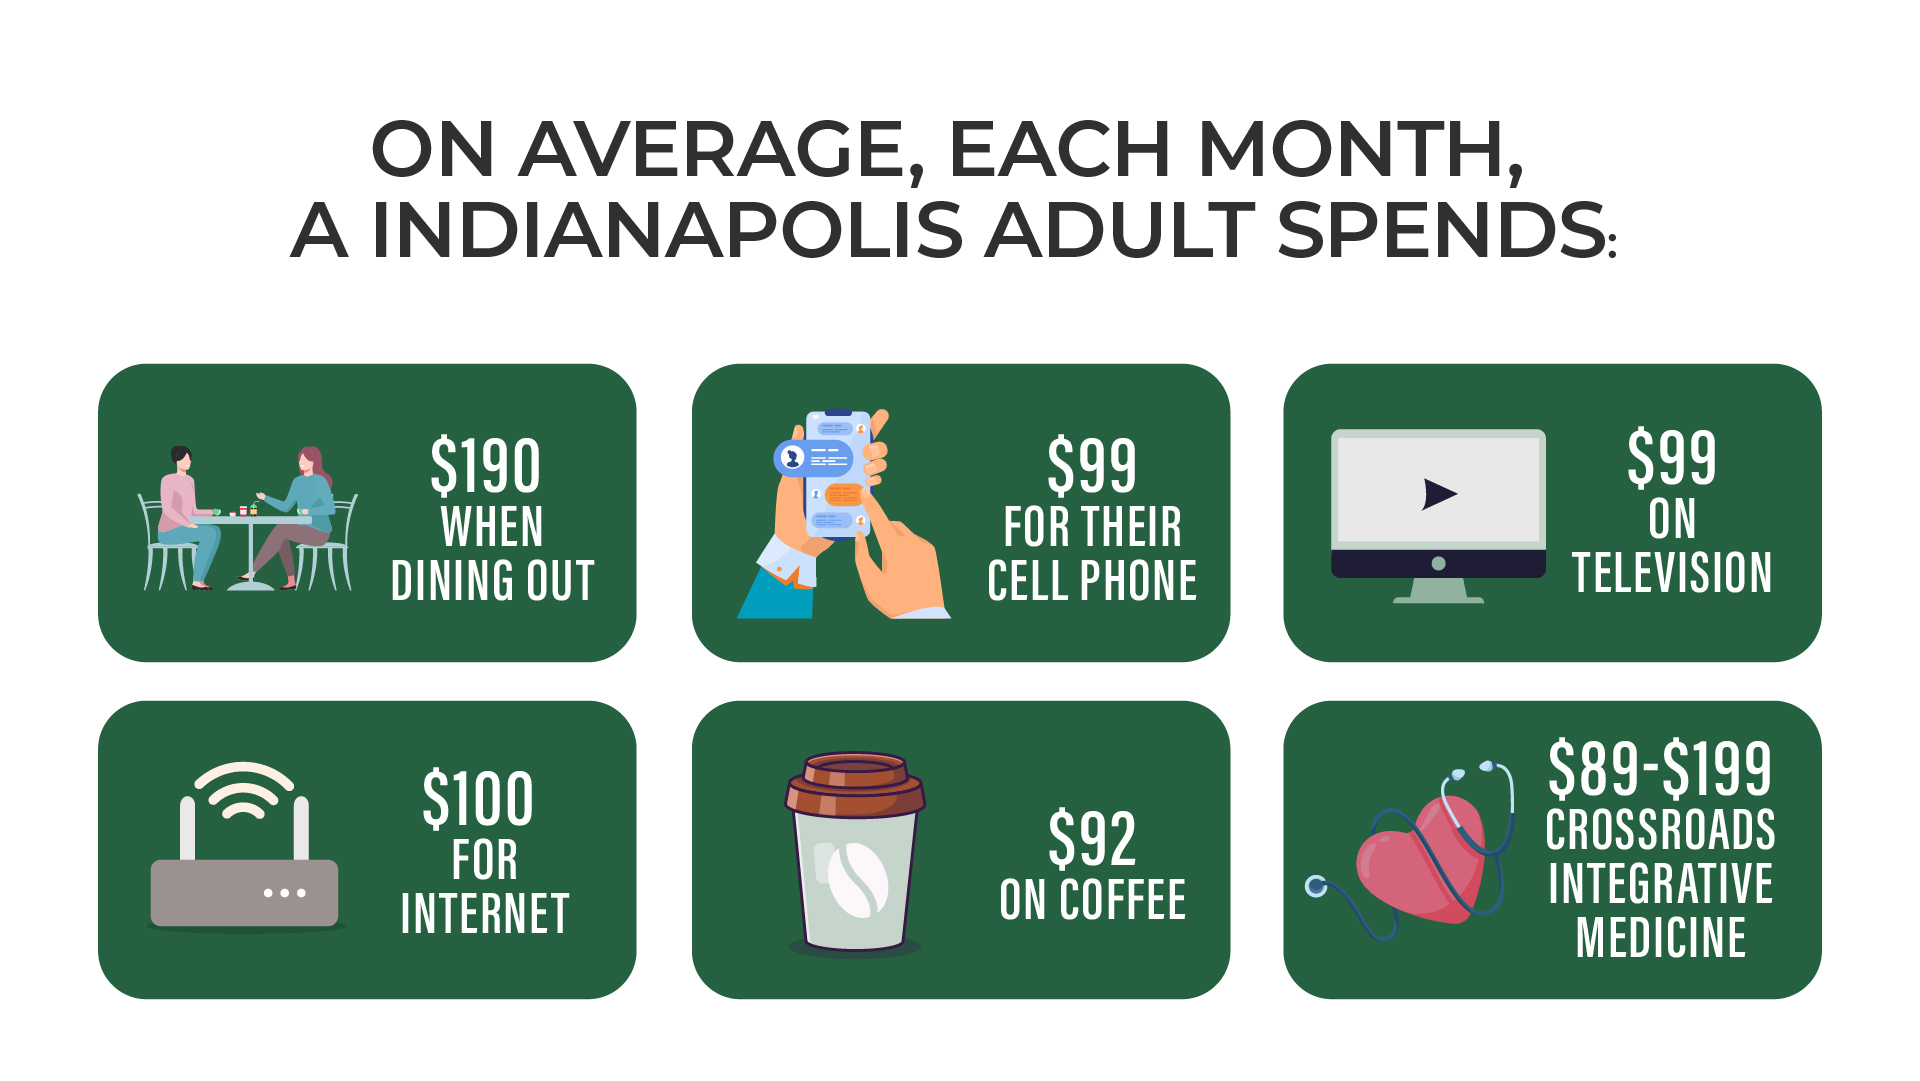 ON AVERAGE, EACH MONTH, A INDIANAPOLIS ADULT SPENDS: